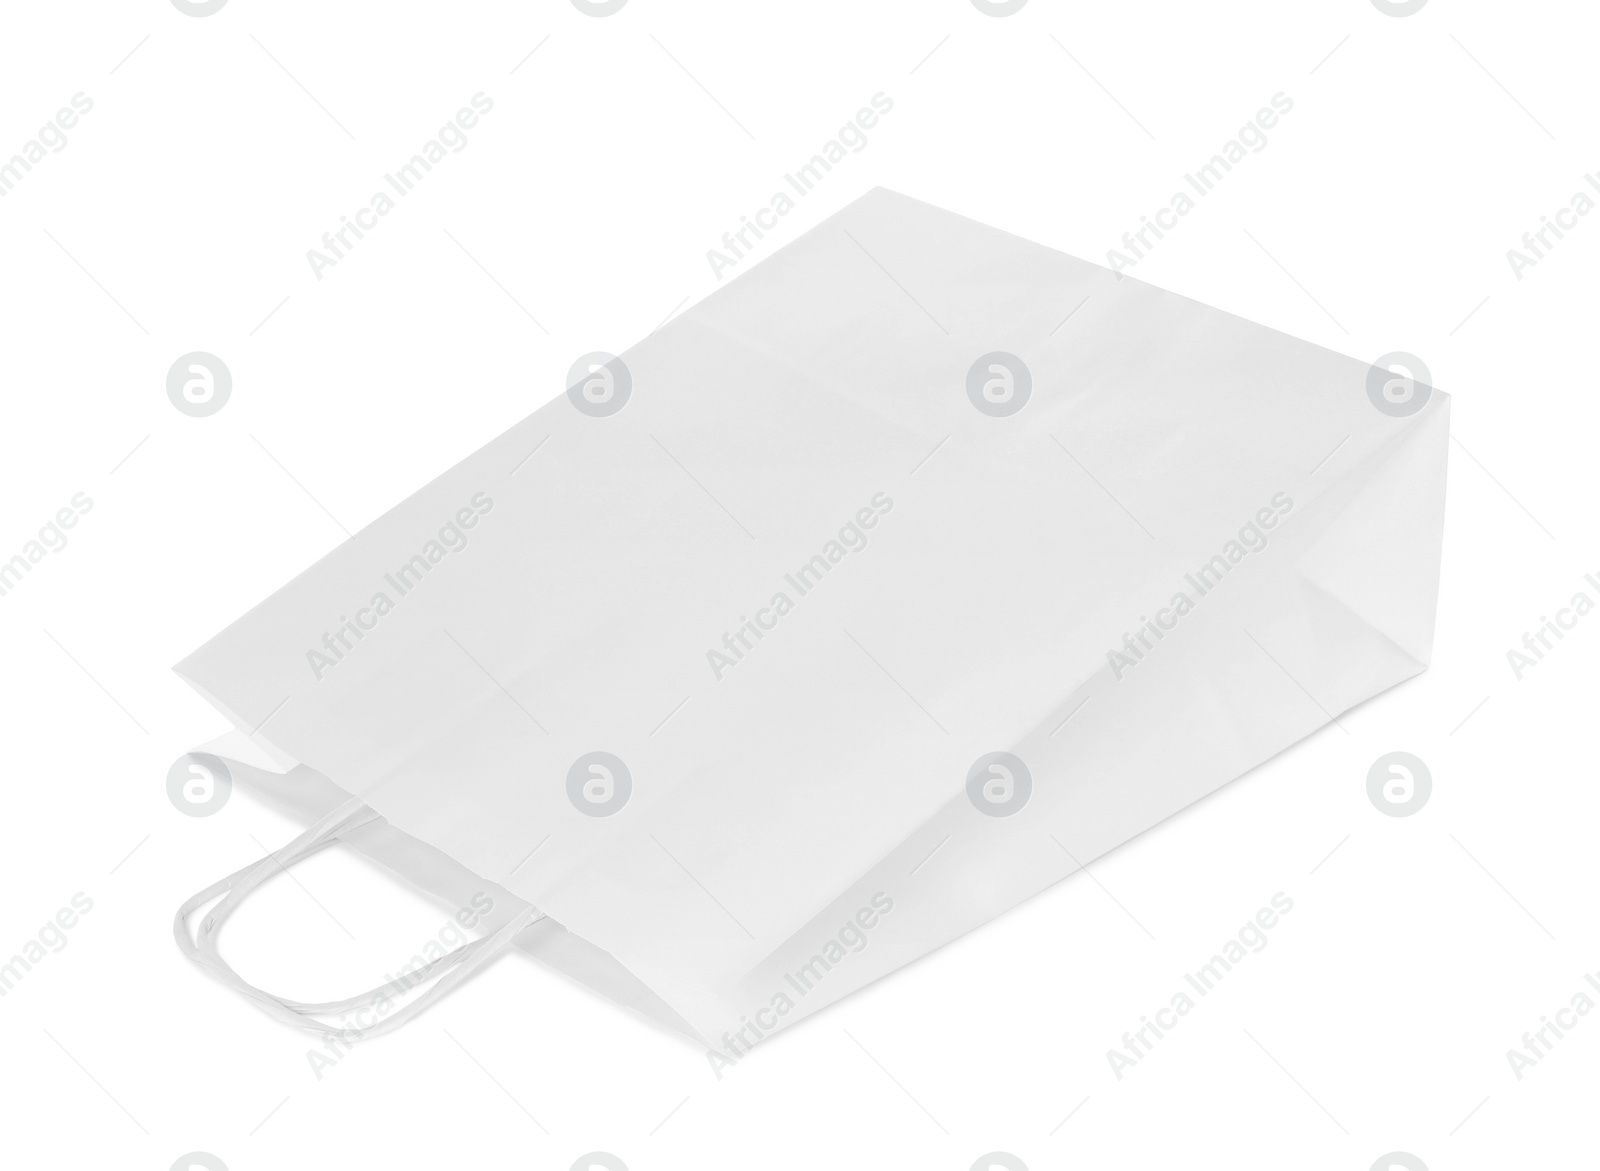 Photo of One paper shopping bag isolated on white